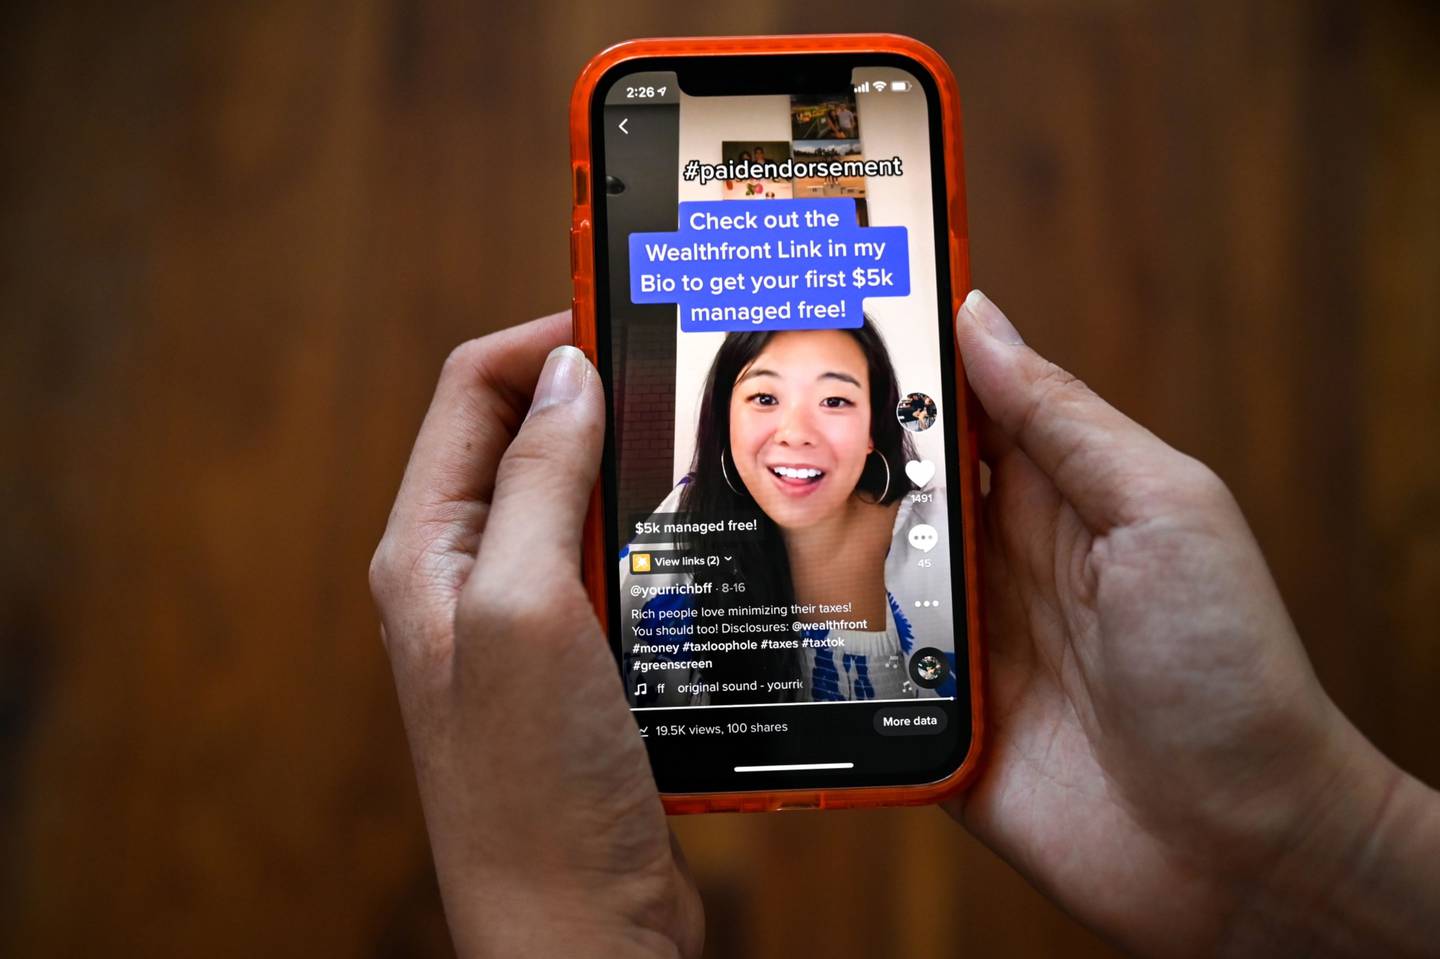 The YourRichBFF TikTok account displaying a paid endorsement by sponsor, Wealthfront. Photographer: Desiree Rios/Bloombergdfd